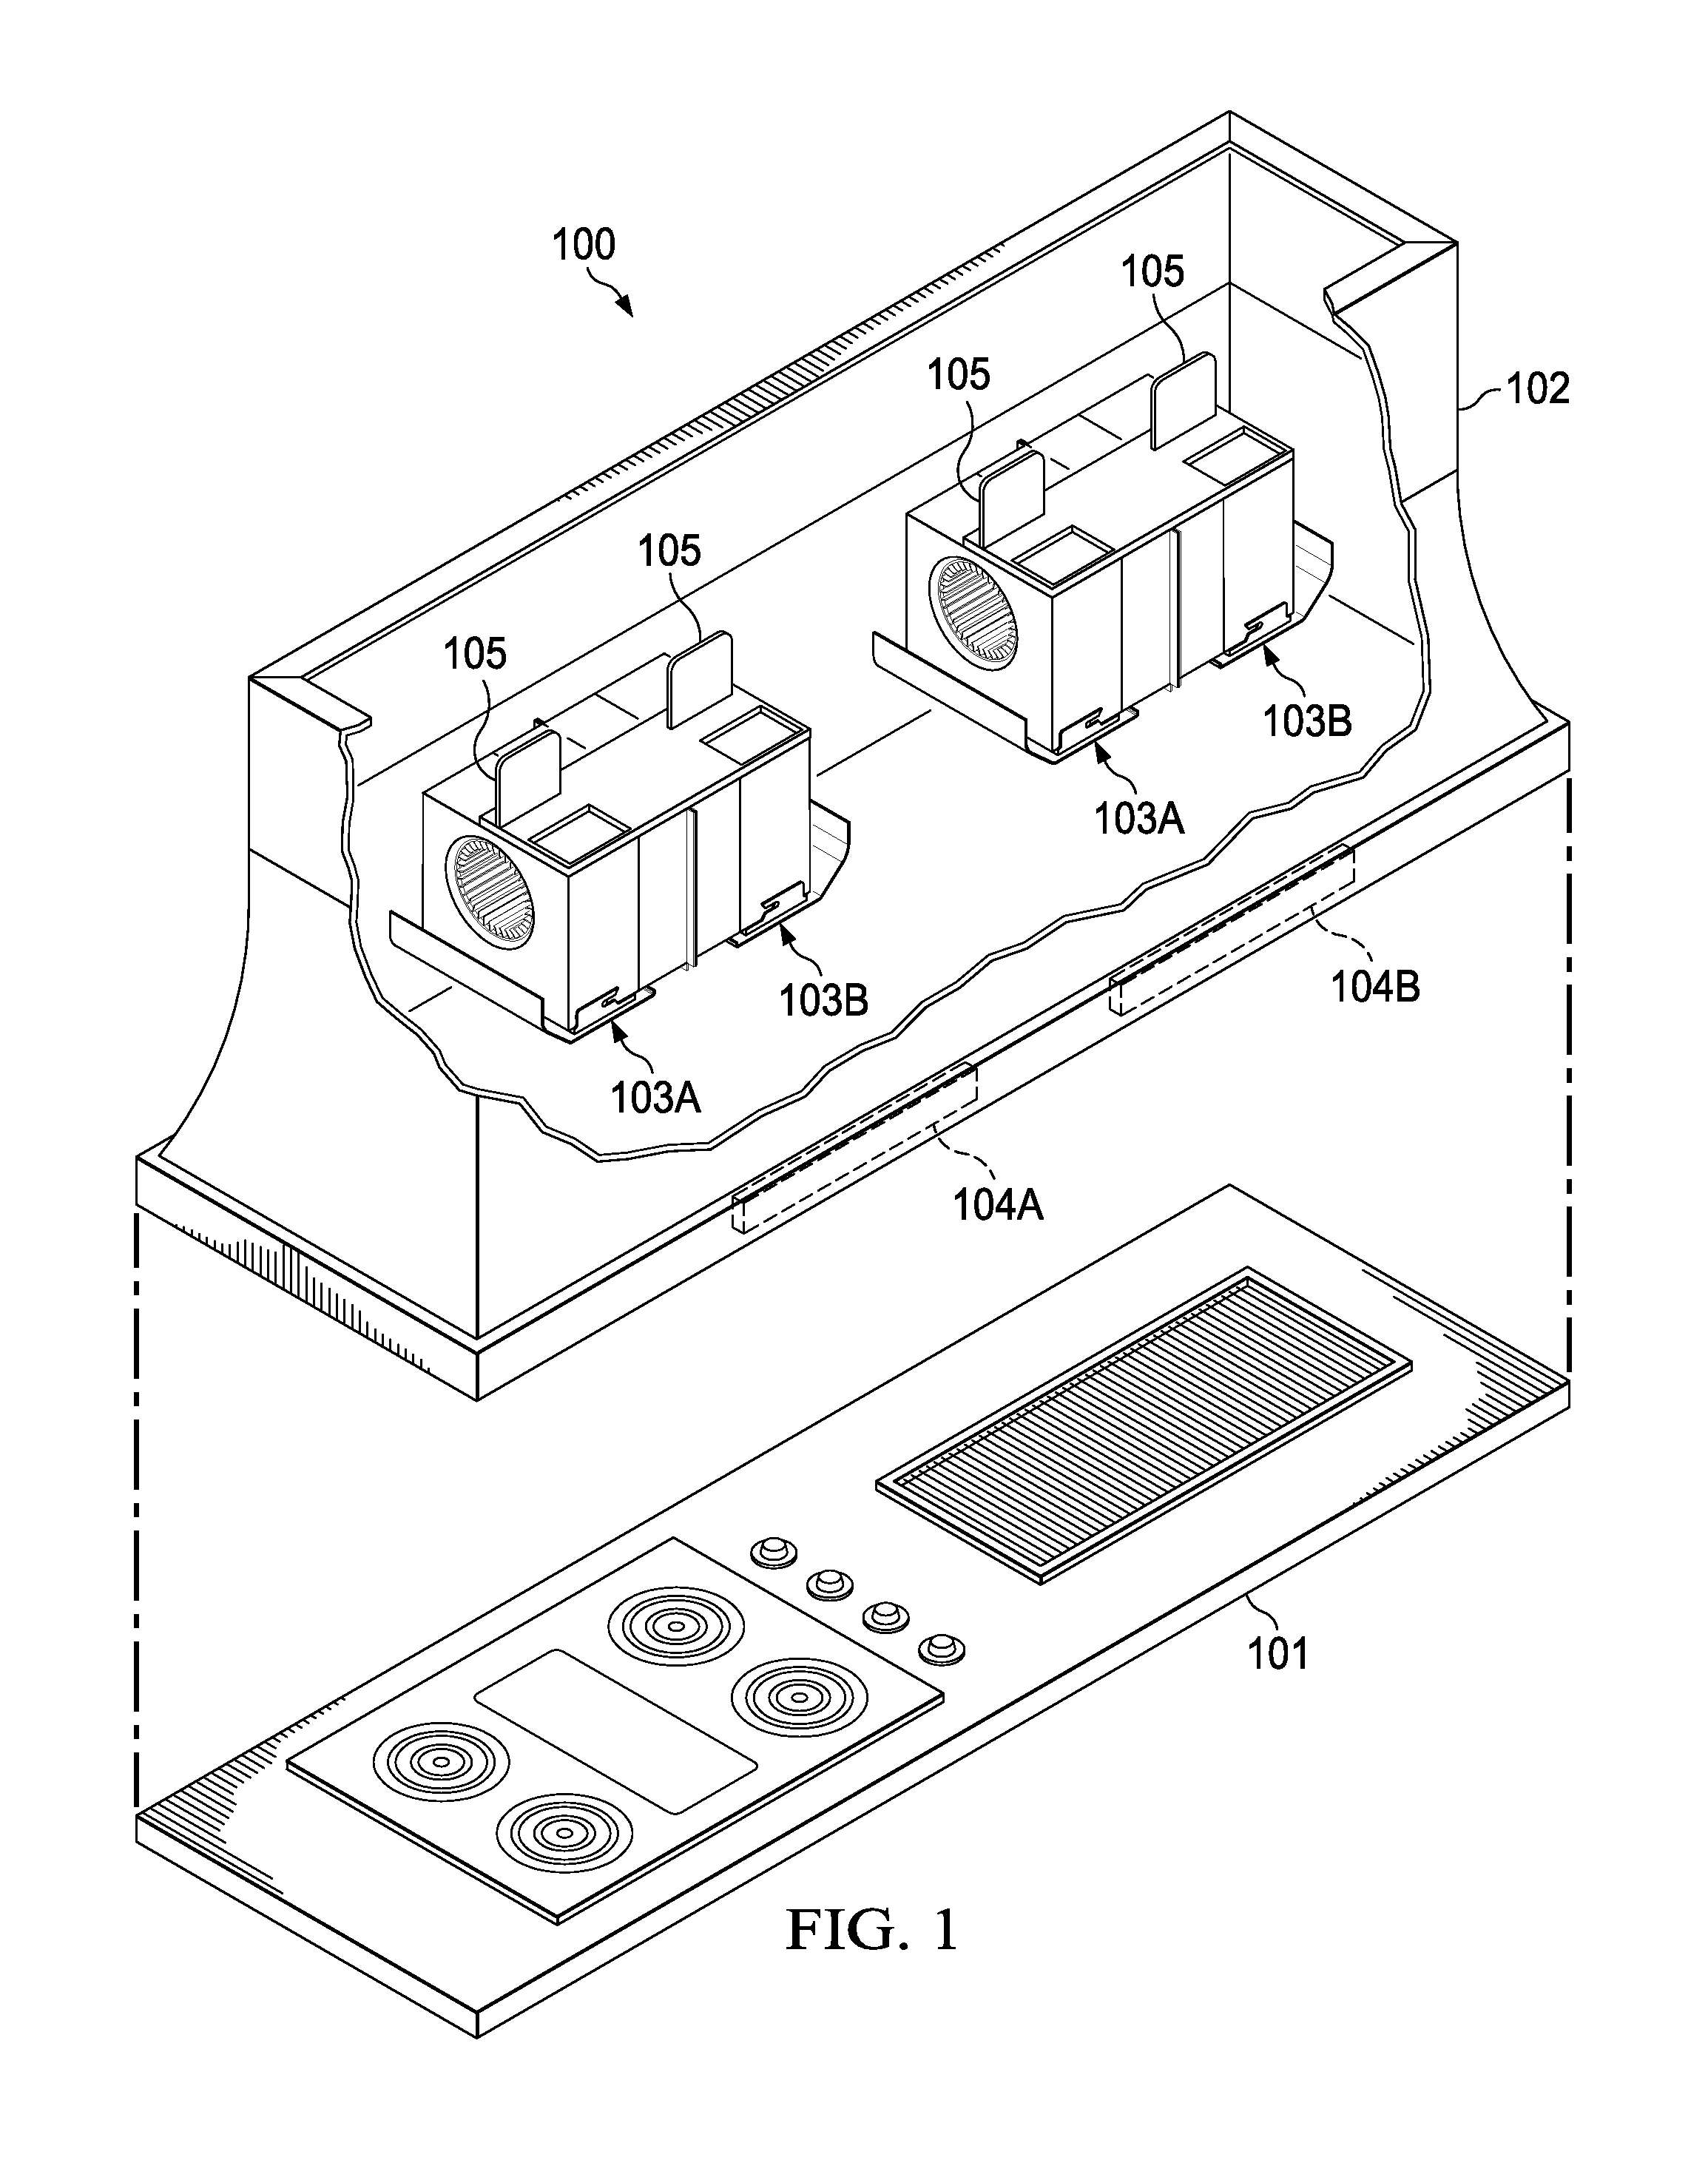 Systems and methods for collecting and removing cooking byproducts in a kitchen ventilation system